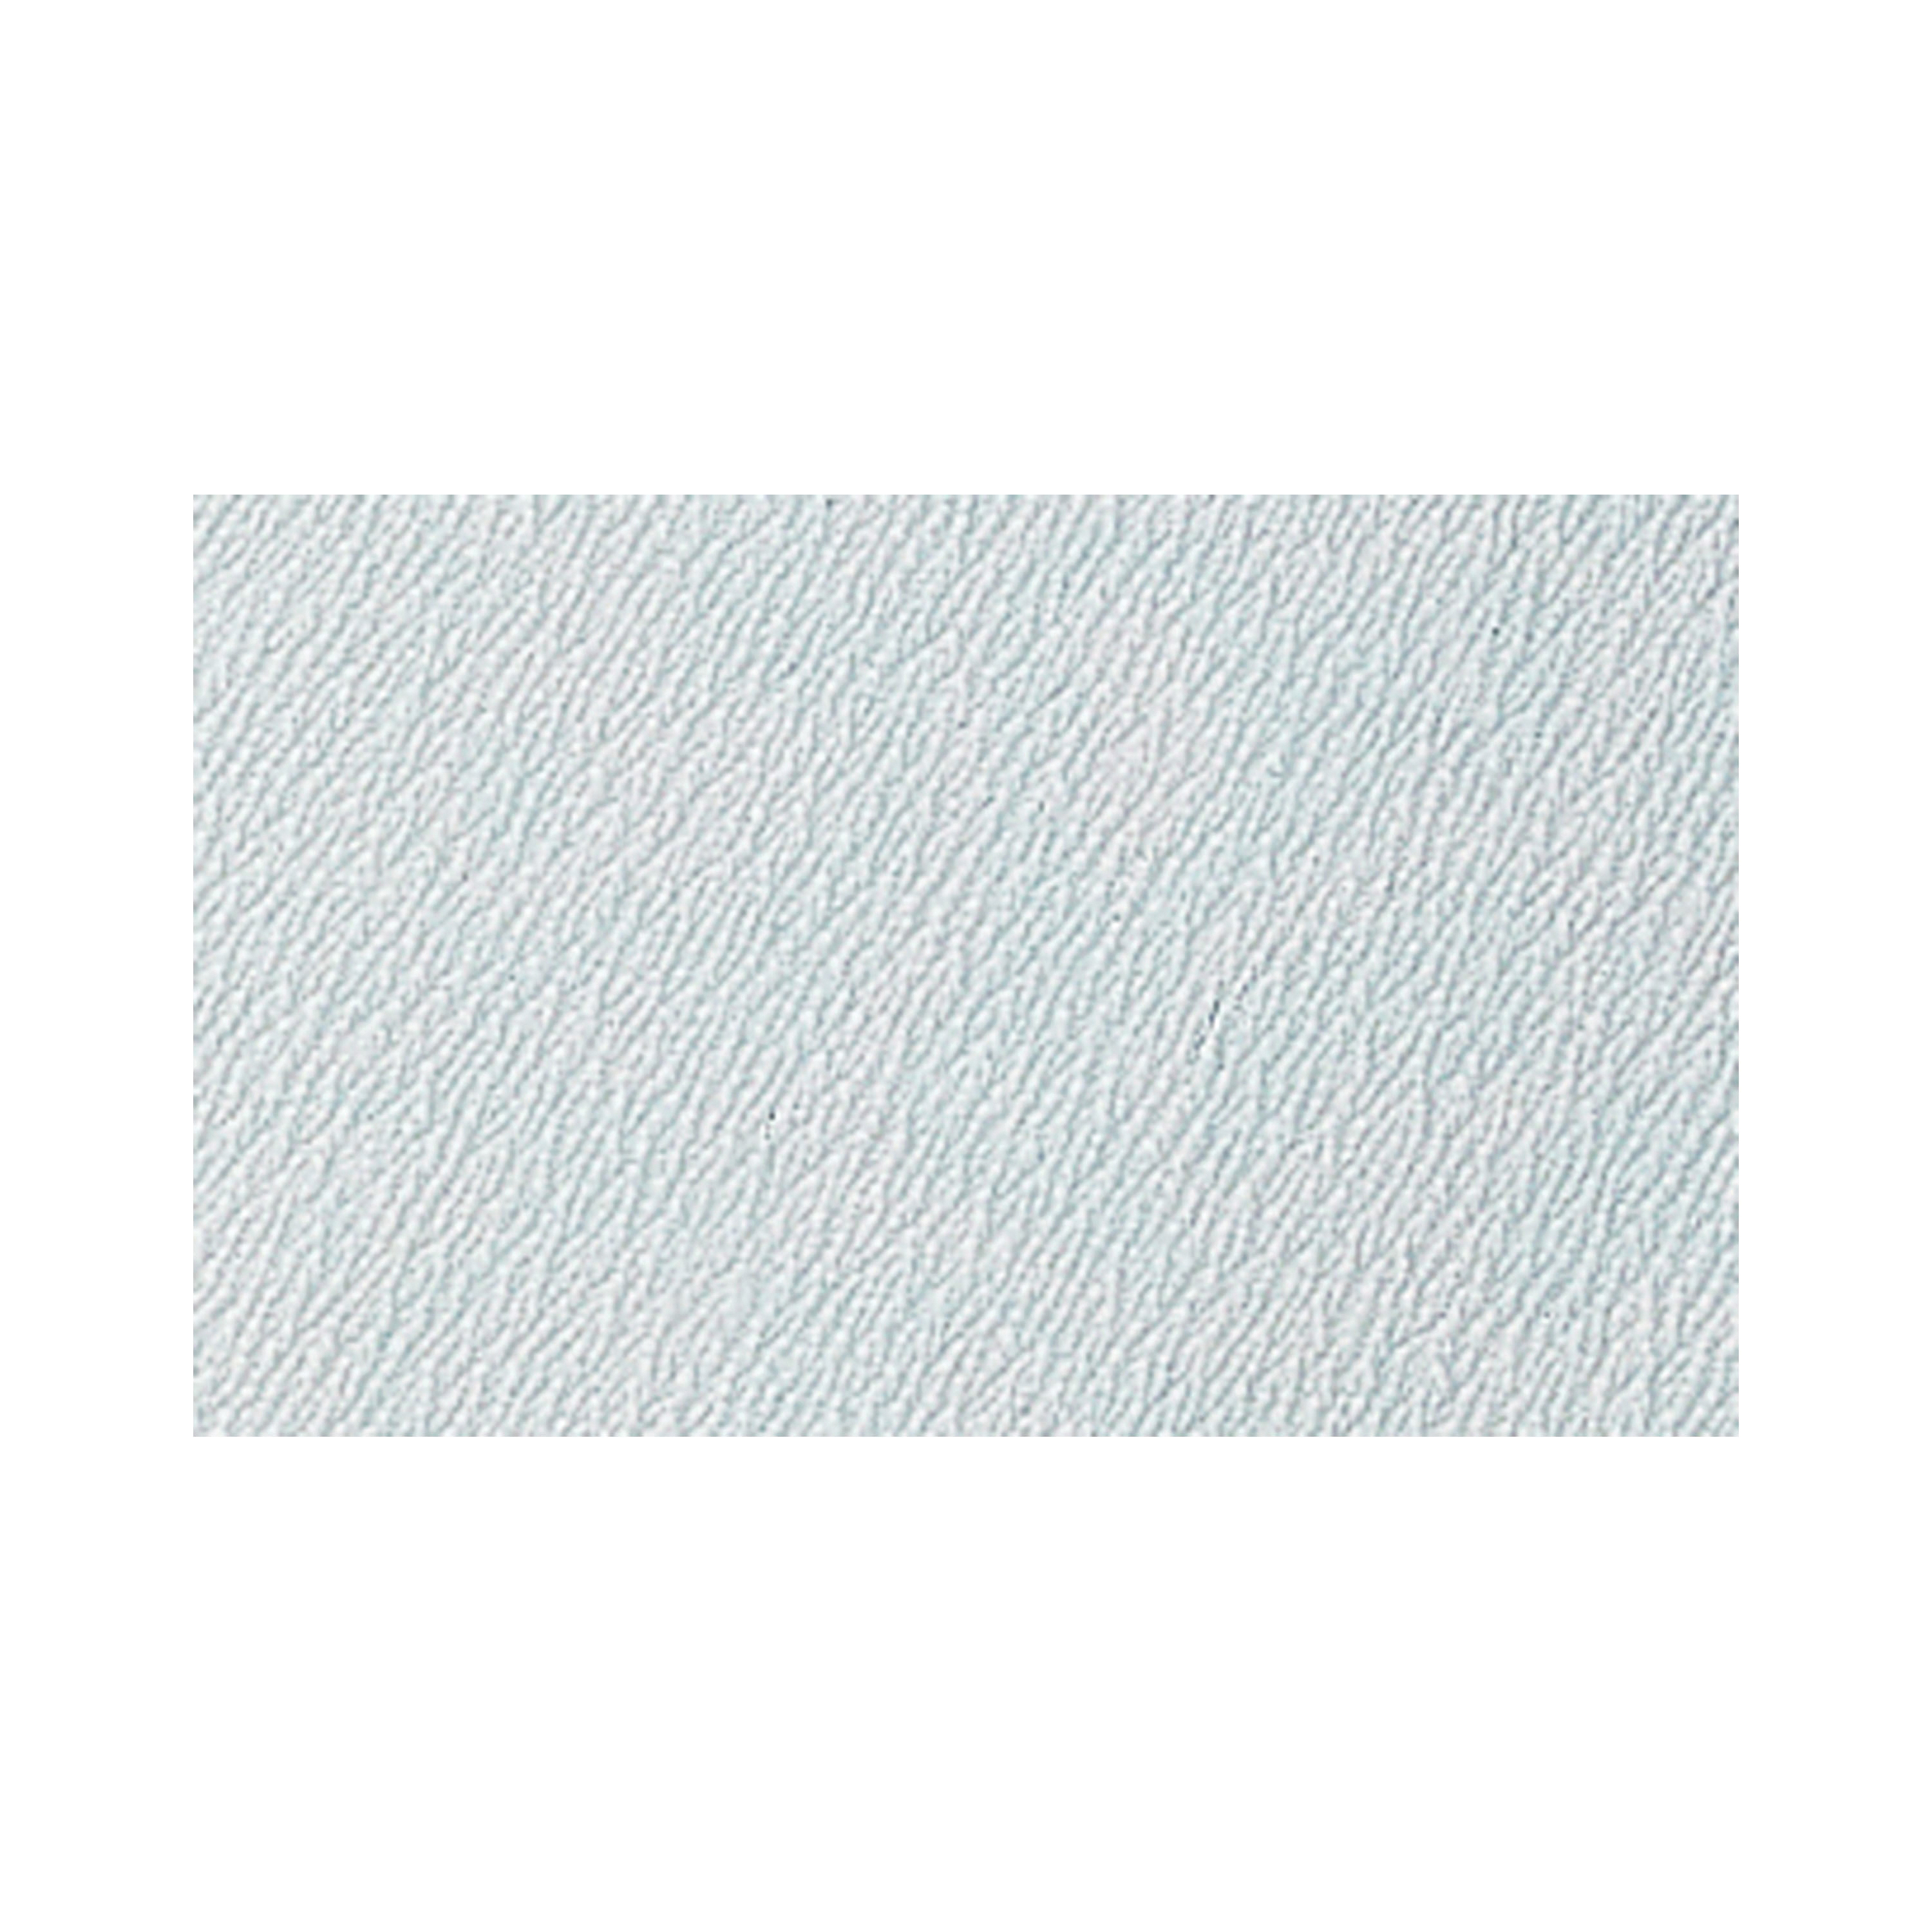 3M™ 051144-02354 435U Coated Sanding Sheet, 11 in L x 9 in W, 150 Grit, Very Fine Grade, Silicon Carbide Abrasive, Paper Backing